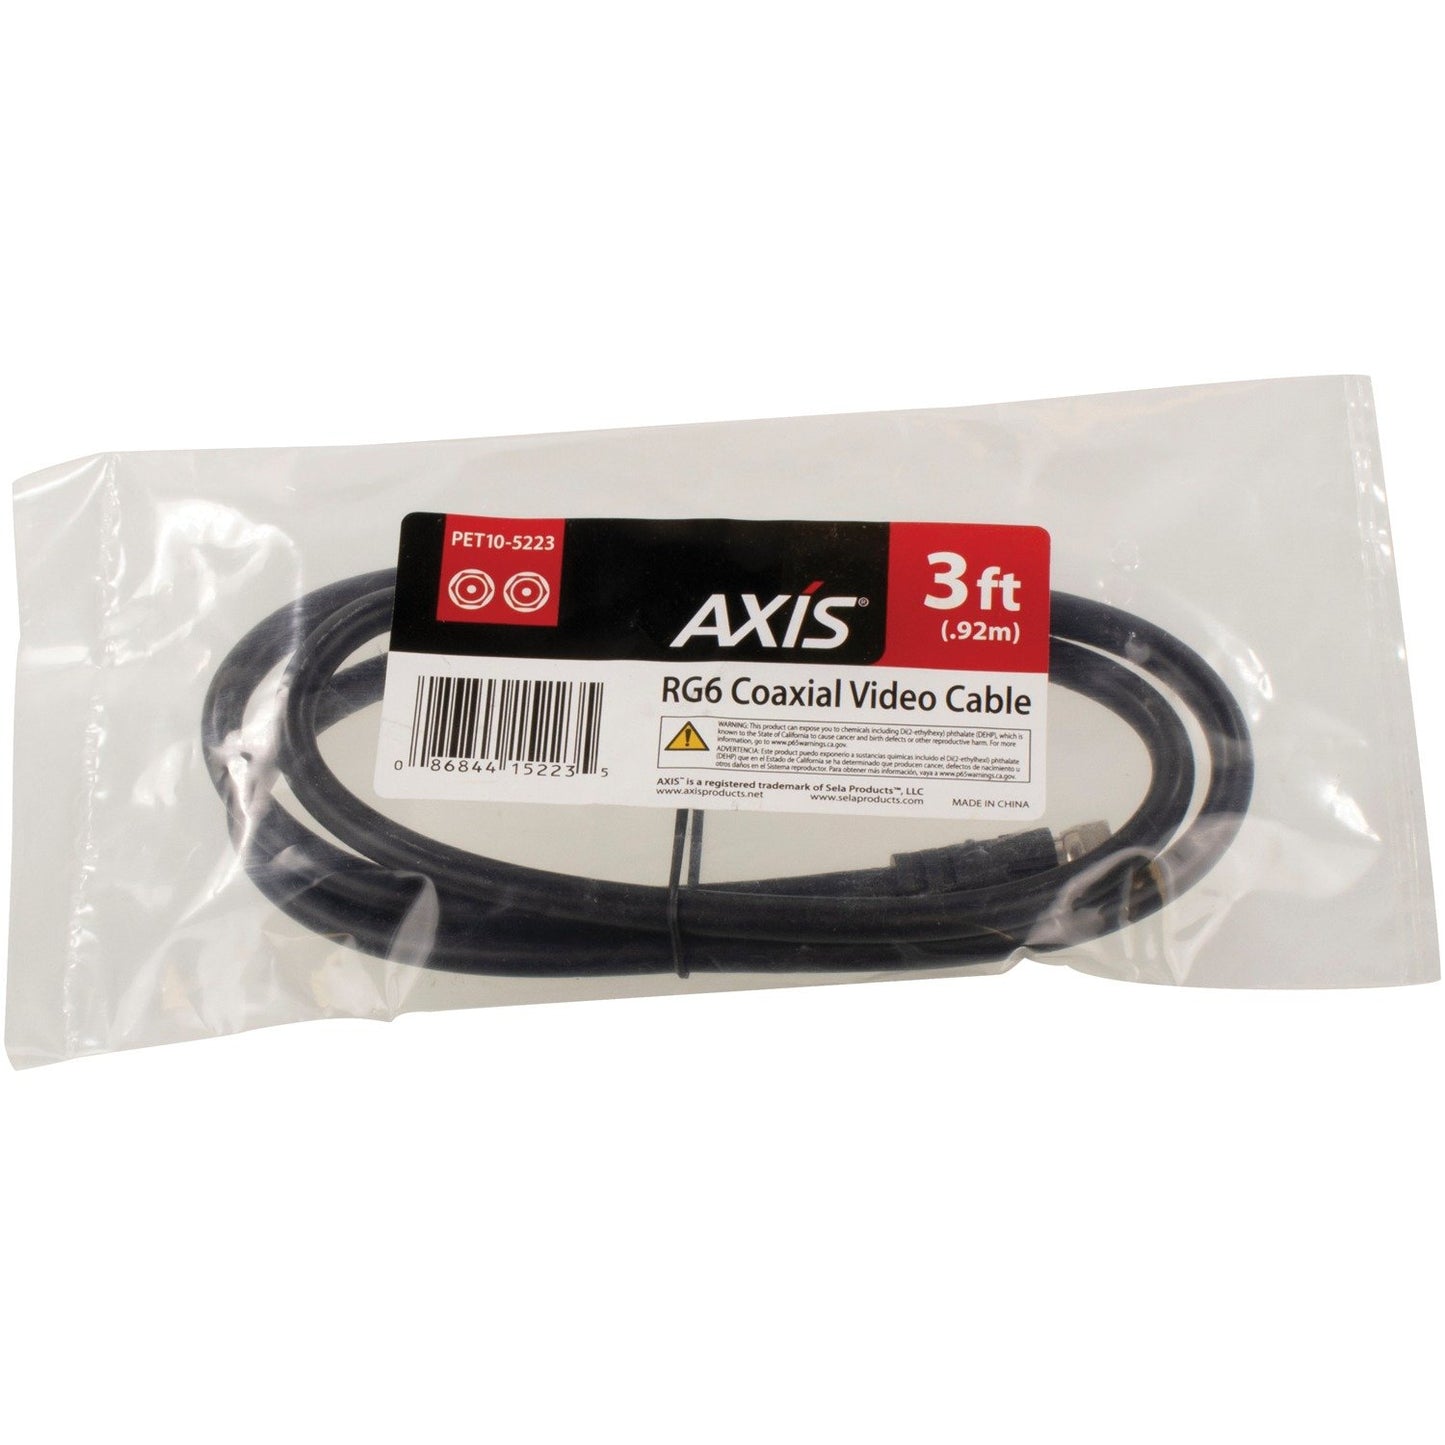 AXIS PET10-5223 Cable Rg6 F-F Screw On 3'